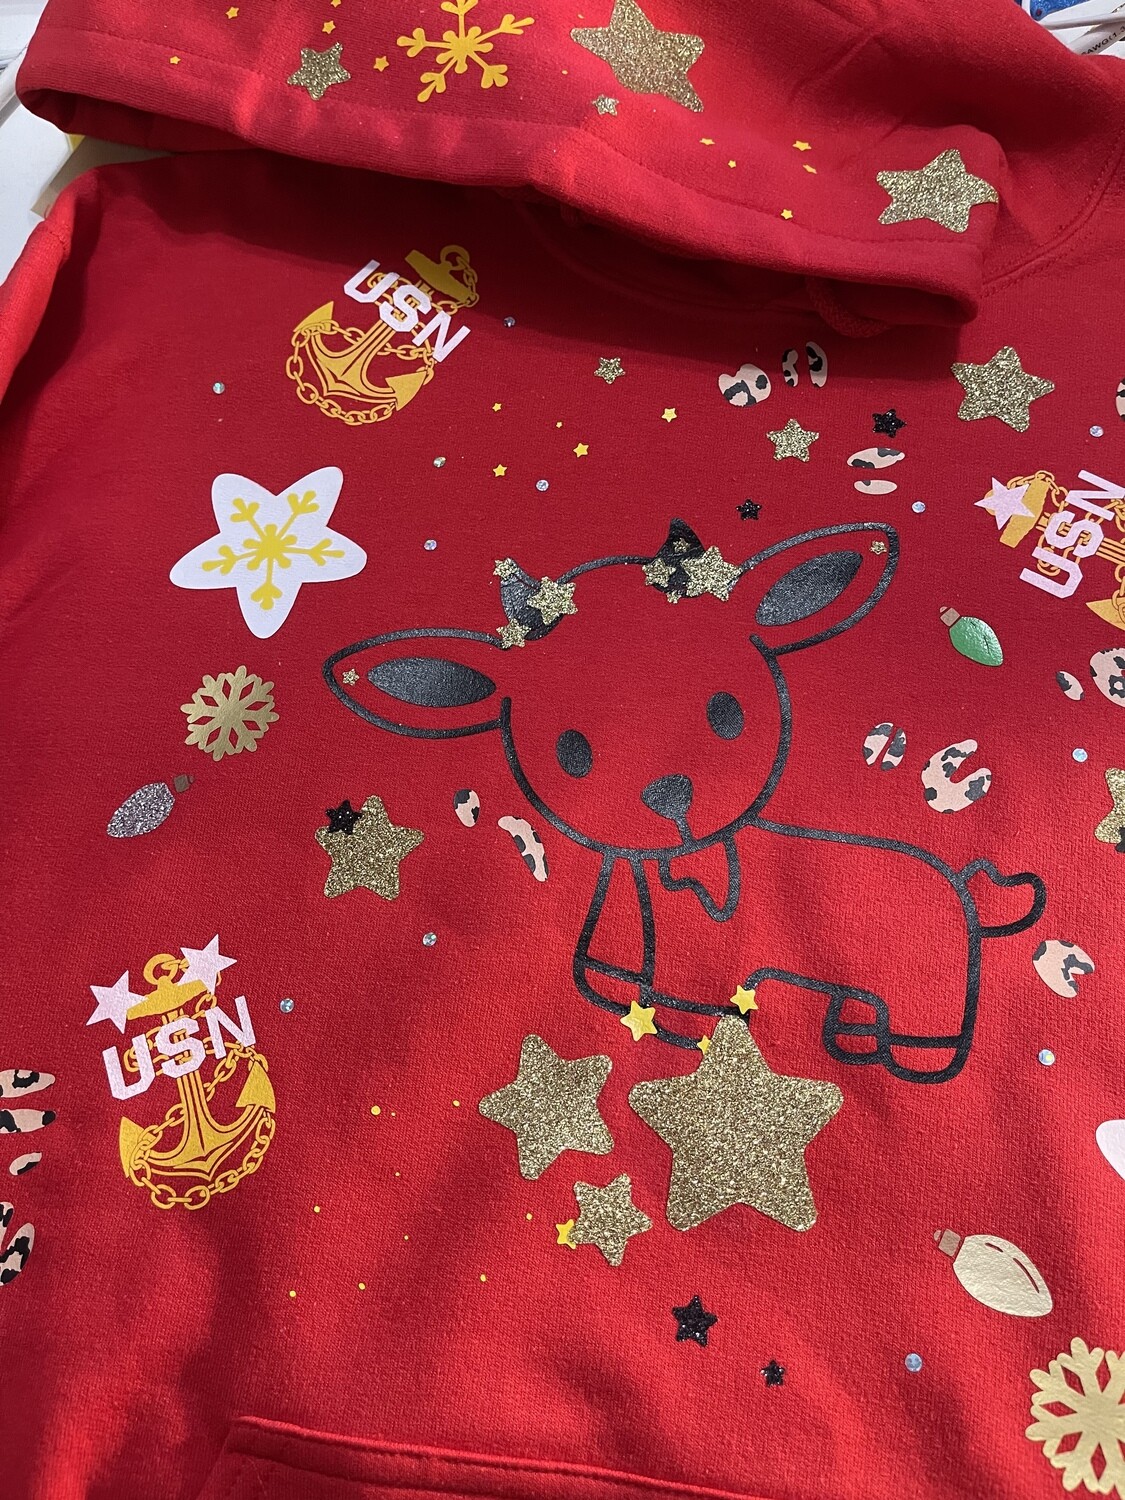 🎄CPO holiday shirt, each unique, and festive